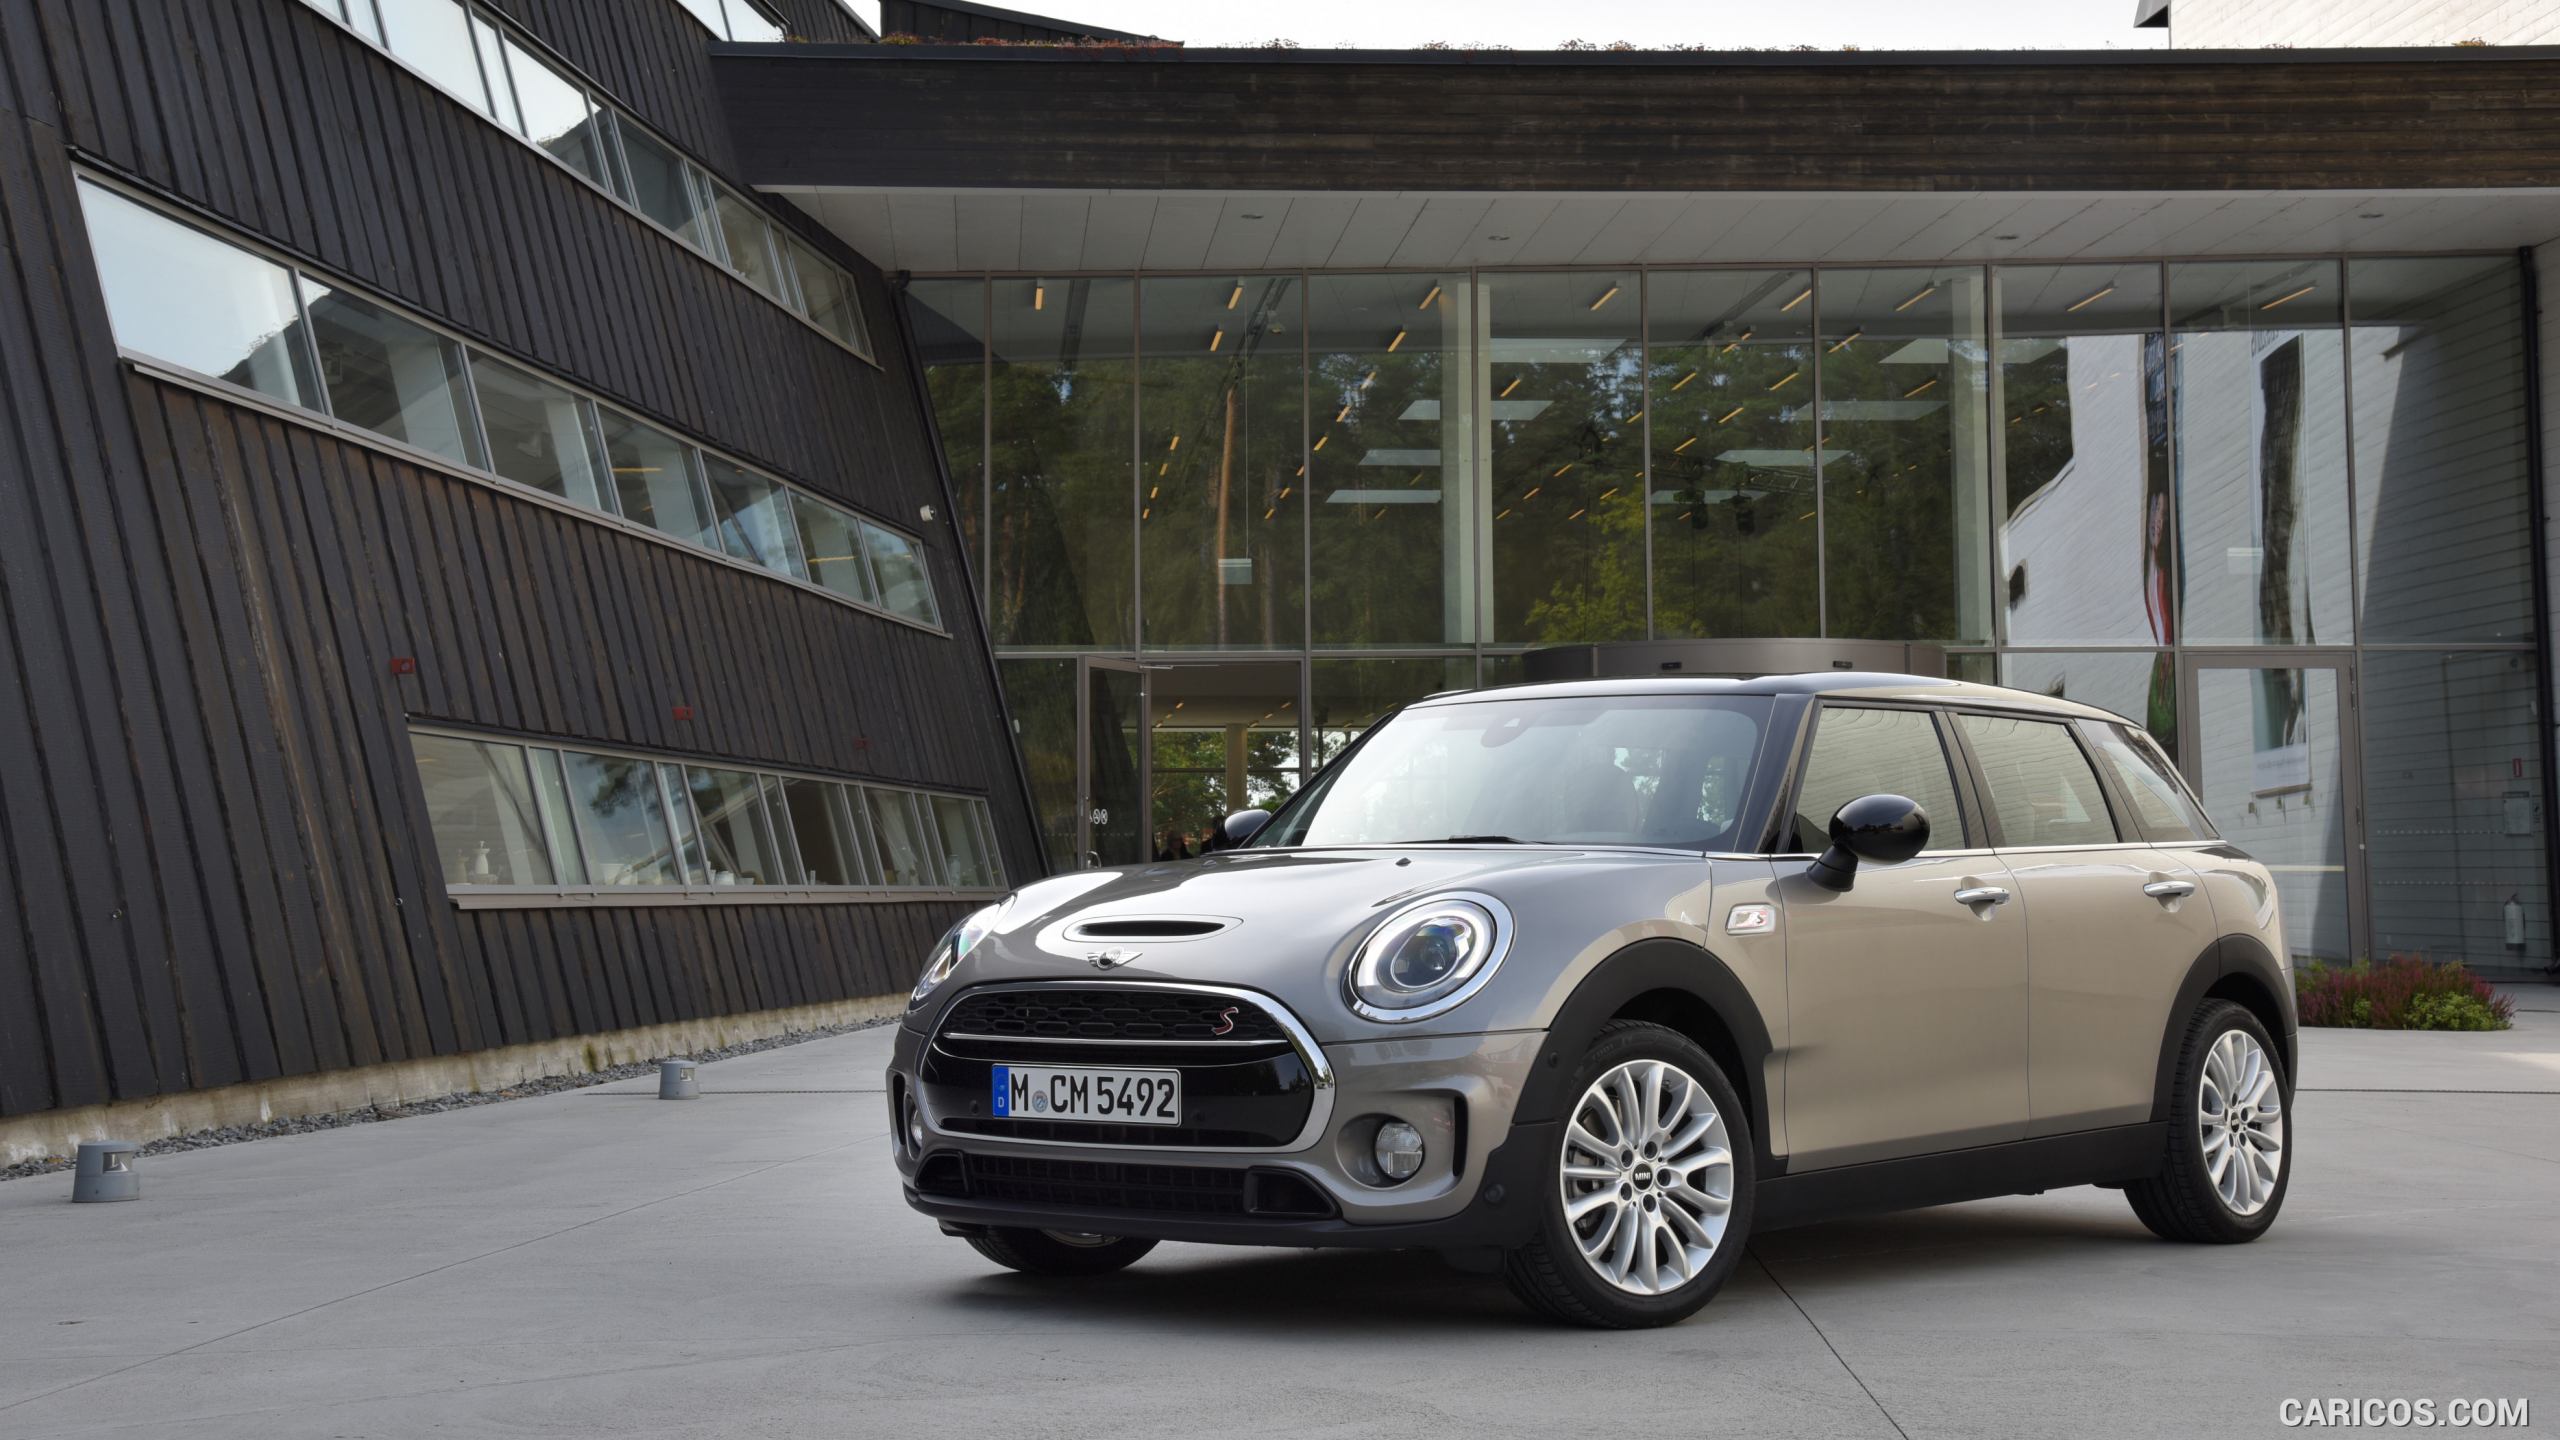 2016 MINI Cooper S Clubman in Metallic Melting Silver - Front, #172 of 380